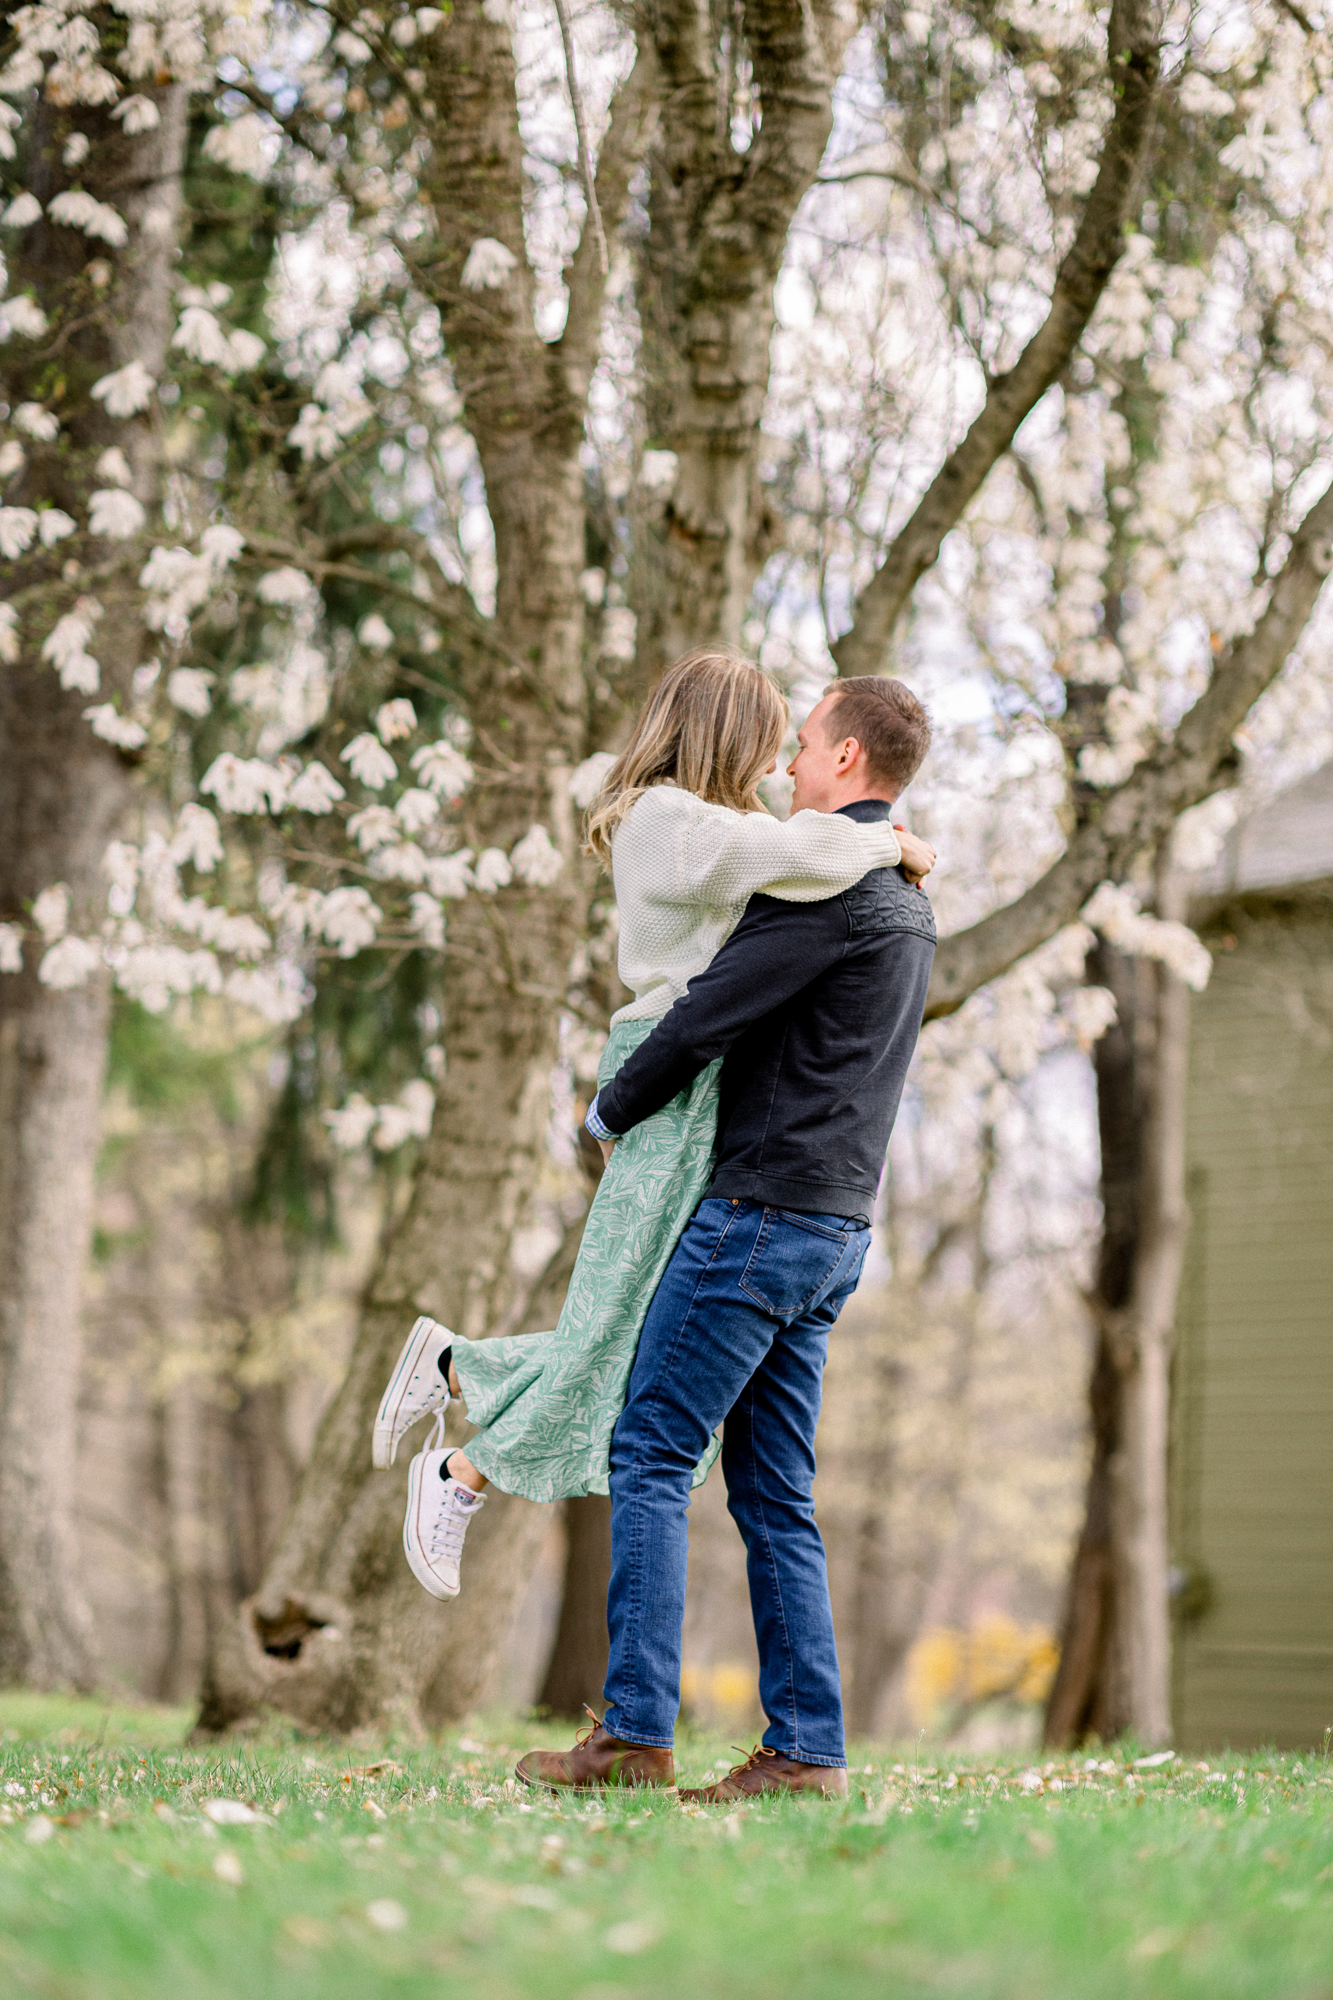 Playful NYC Engagement Photography with Spring Blossoms